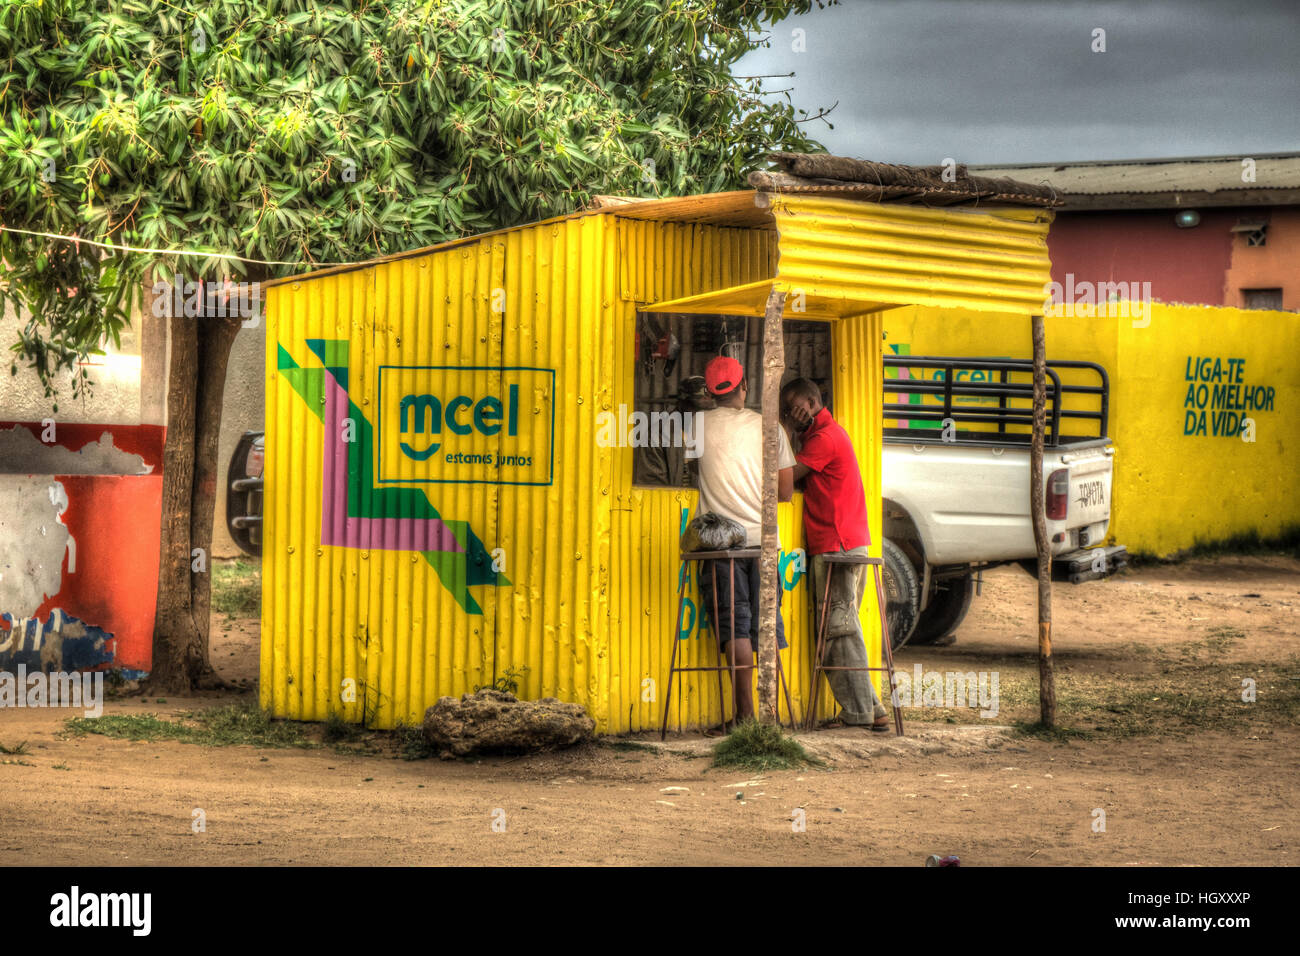 MCEL phone card shop painted in the colours of the Mozambiqan telephone company Mcel in rural Catembe, Mozambique. Stock Photo